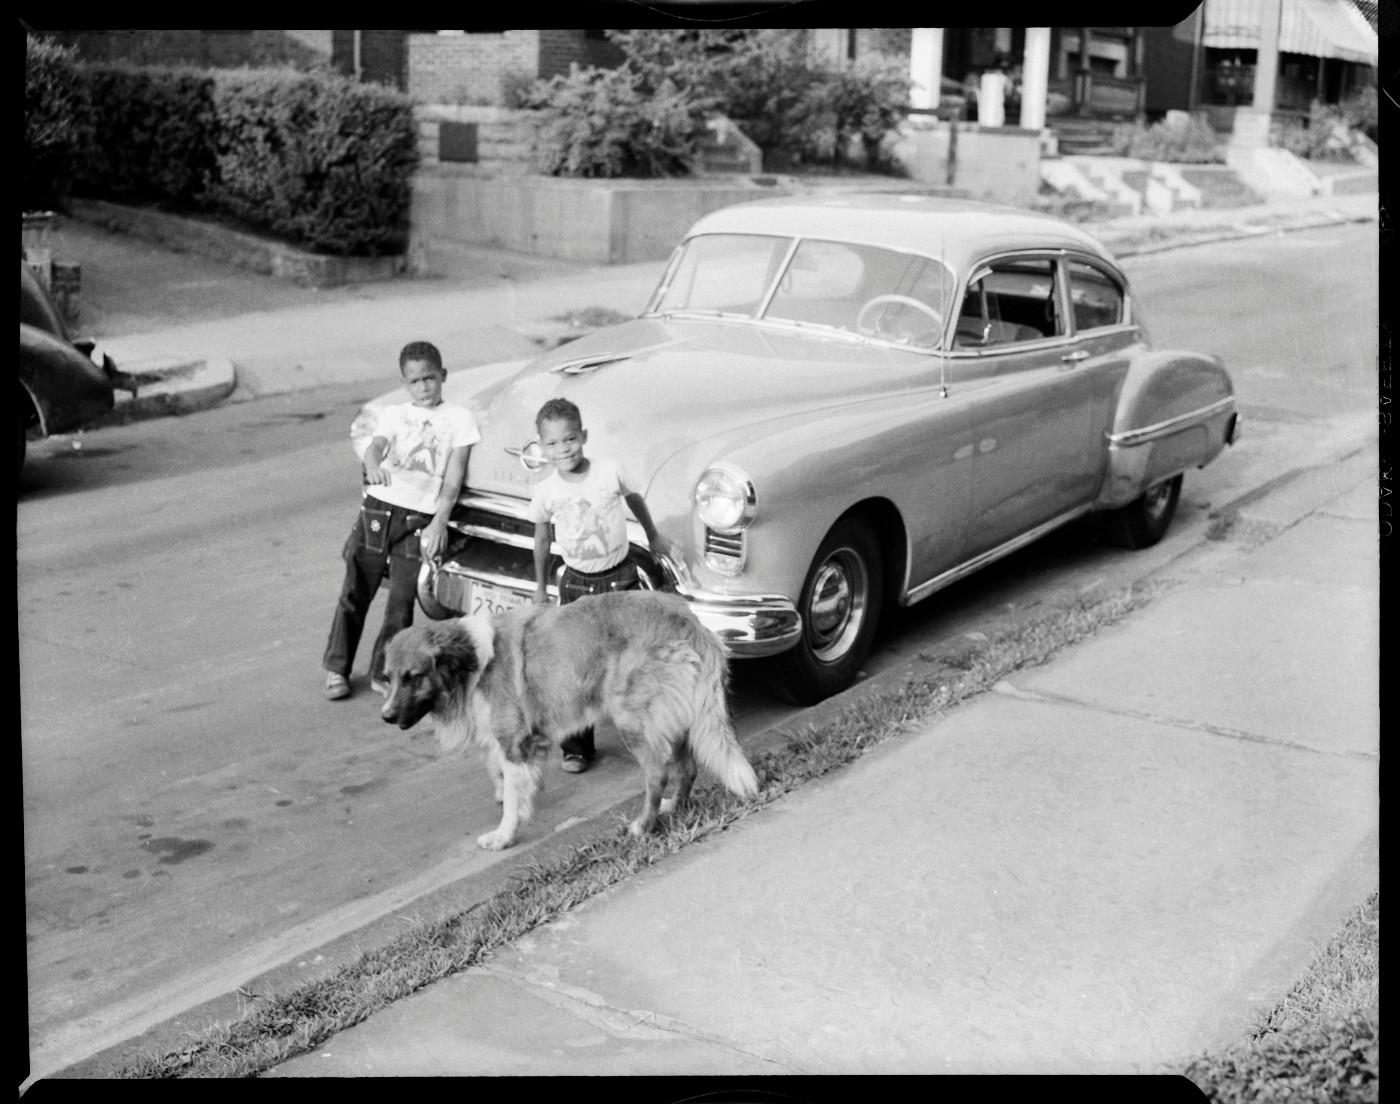 Charles “Teenie” Harris, ‘Ira Vann Harris and Lionel Harris with their dog “Joby” standing in front of parked car, on Mulford Street, Homewood,’ c. 1952